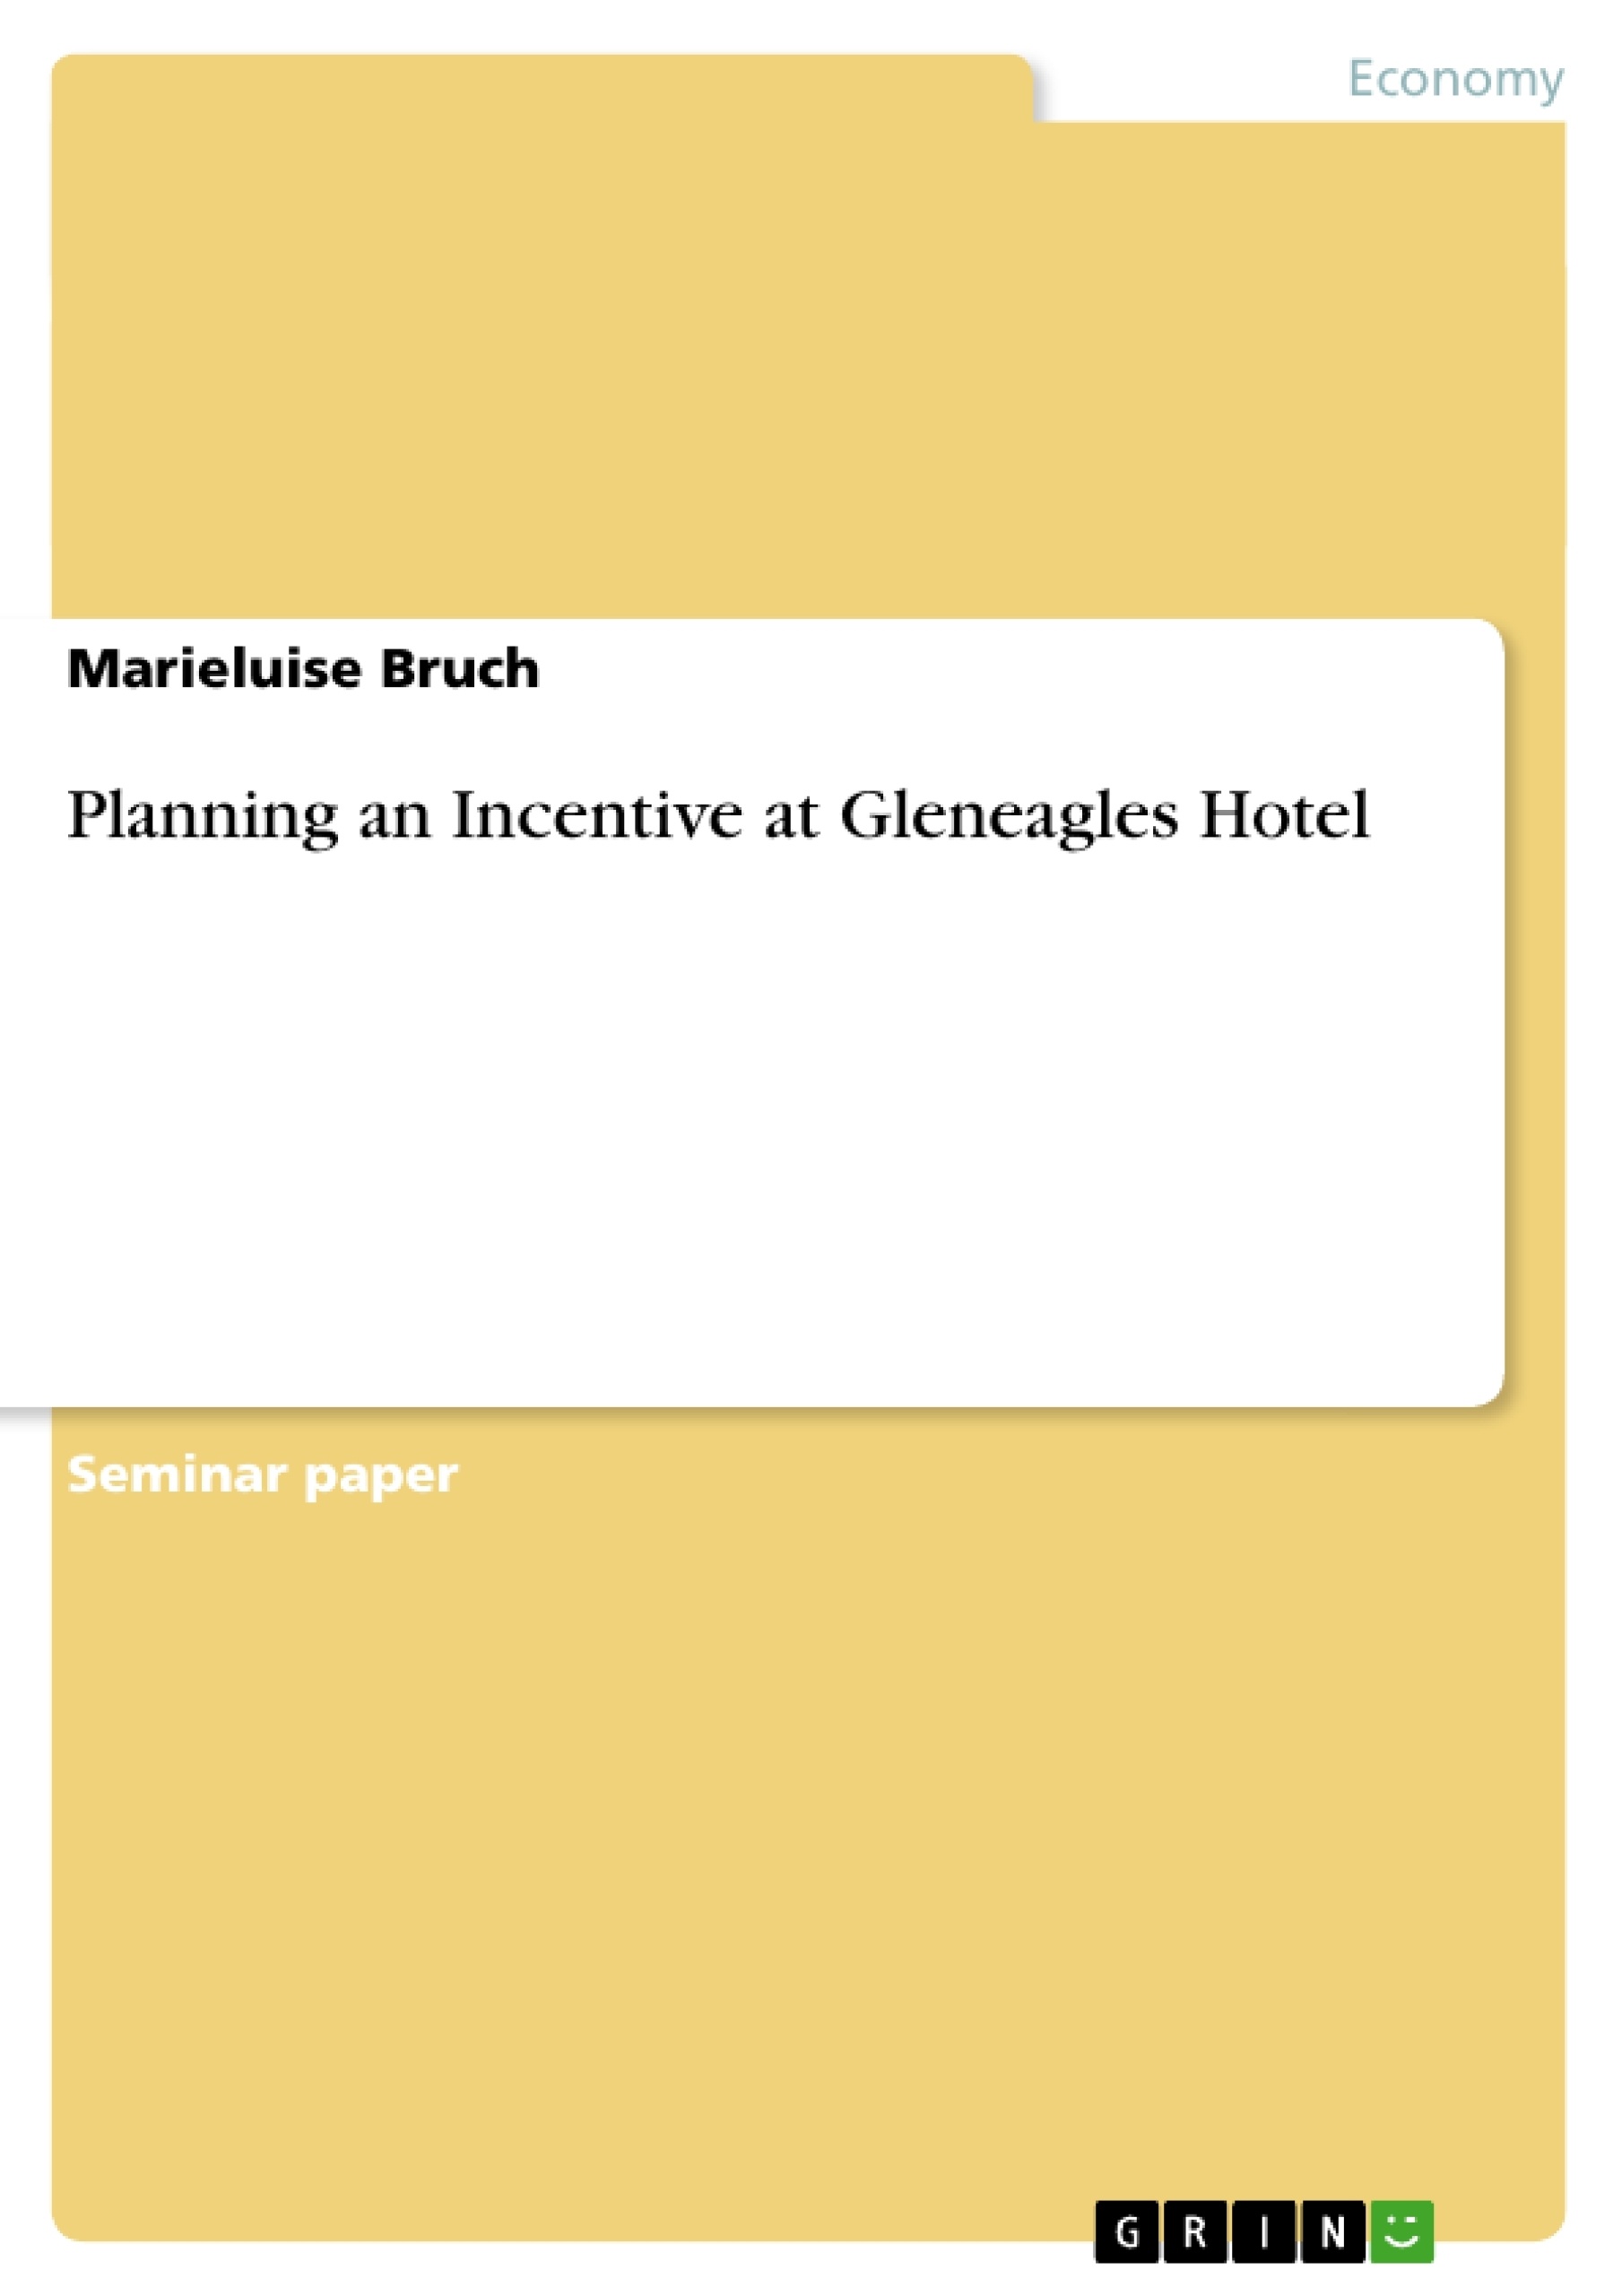 Title: Planning an Incentive at Gleneagles Hotel